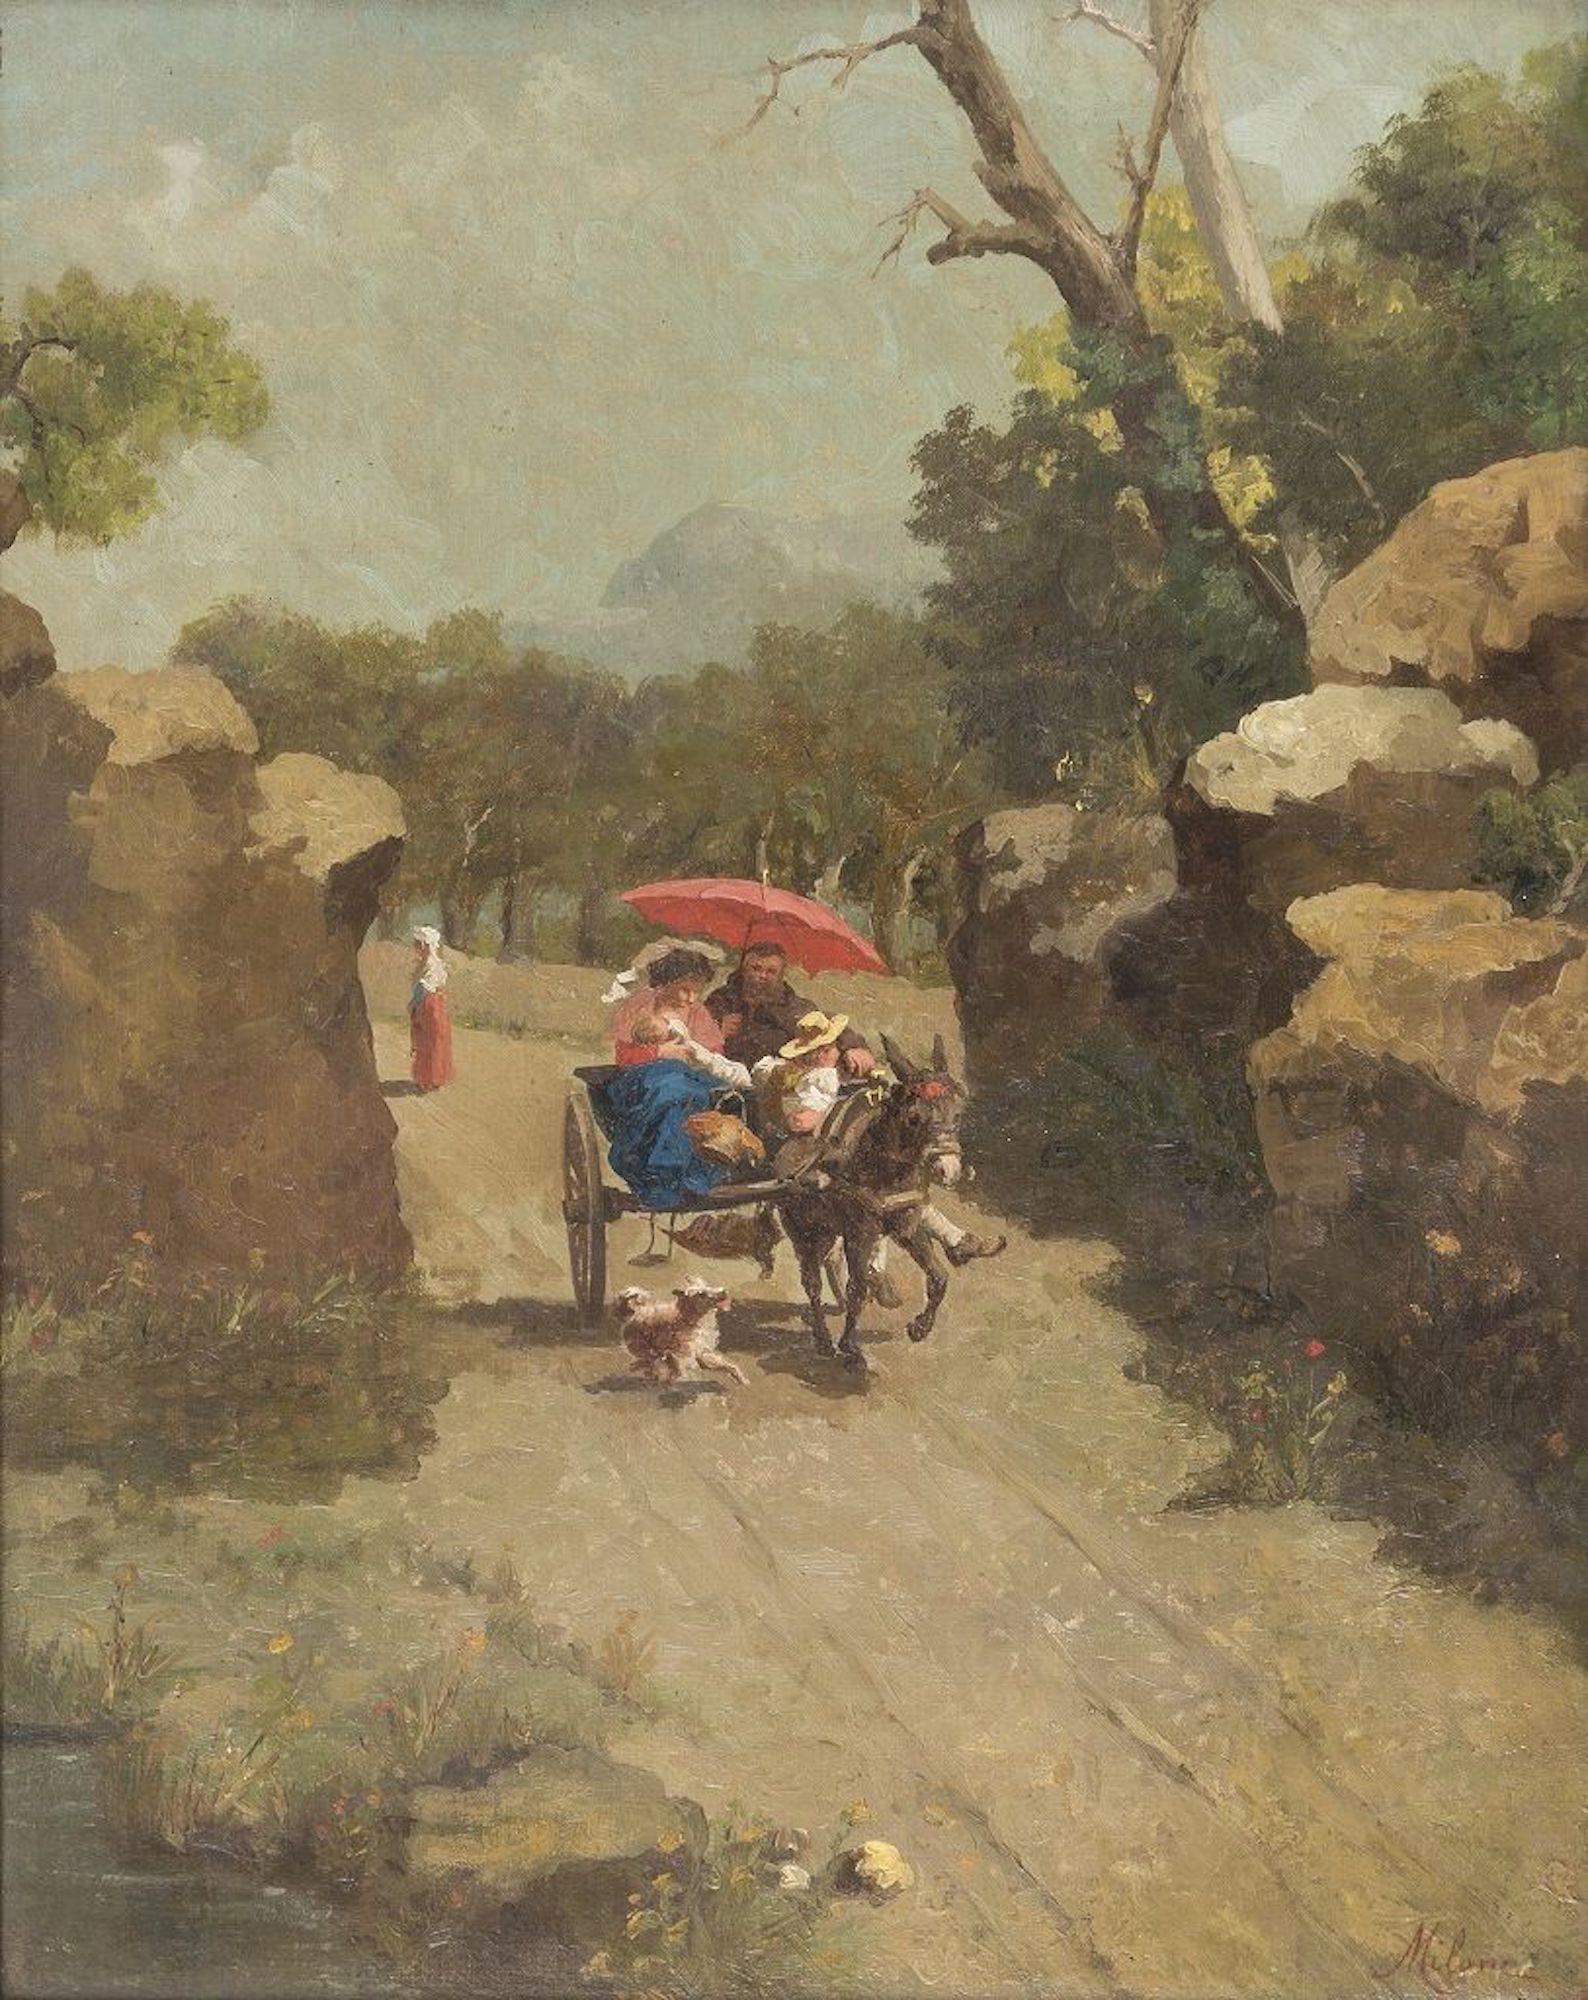 Antonio Milone Figurative Painting - Walking with the Donkey - Oil on Canvas by A. Milone - 1870s